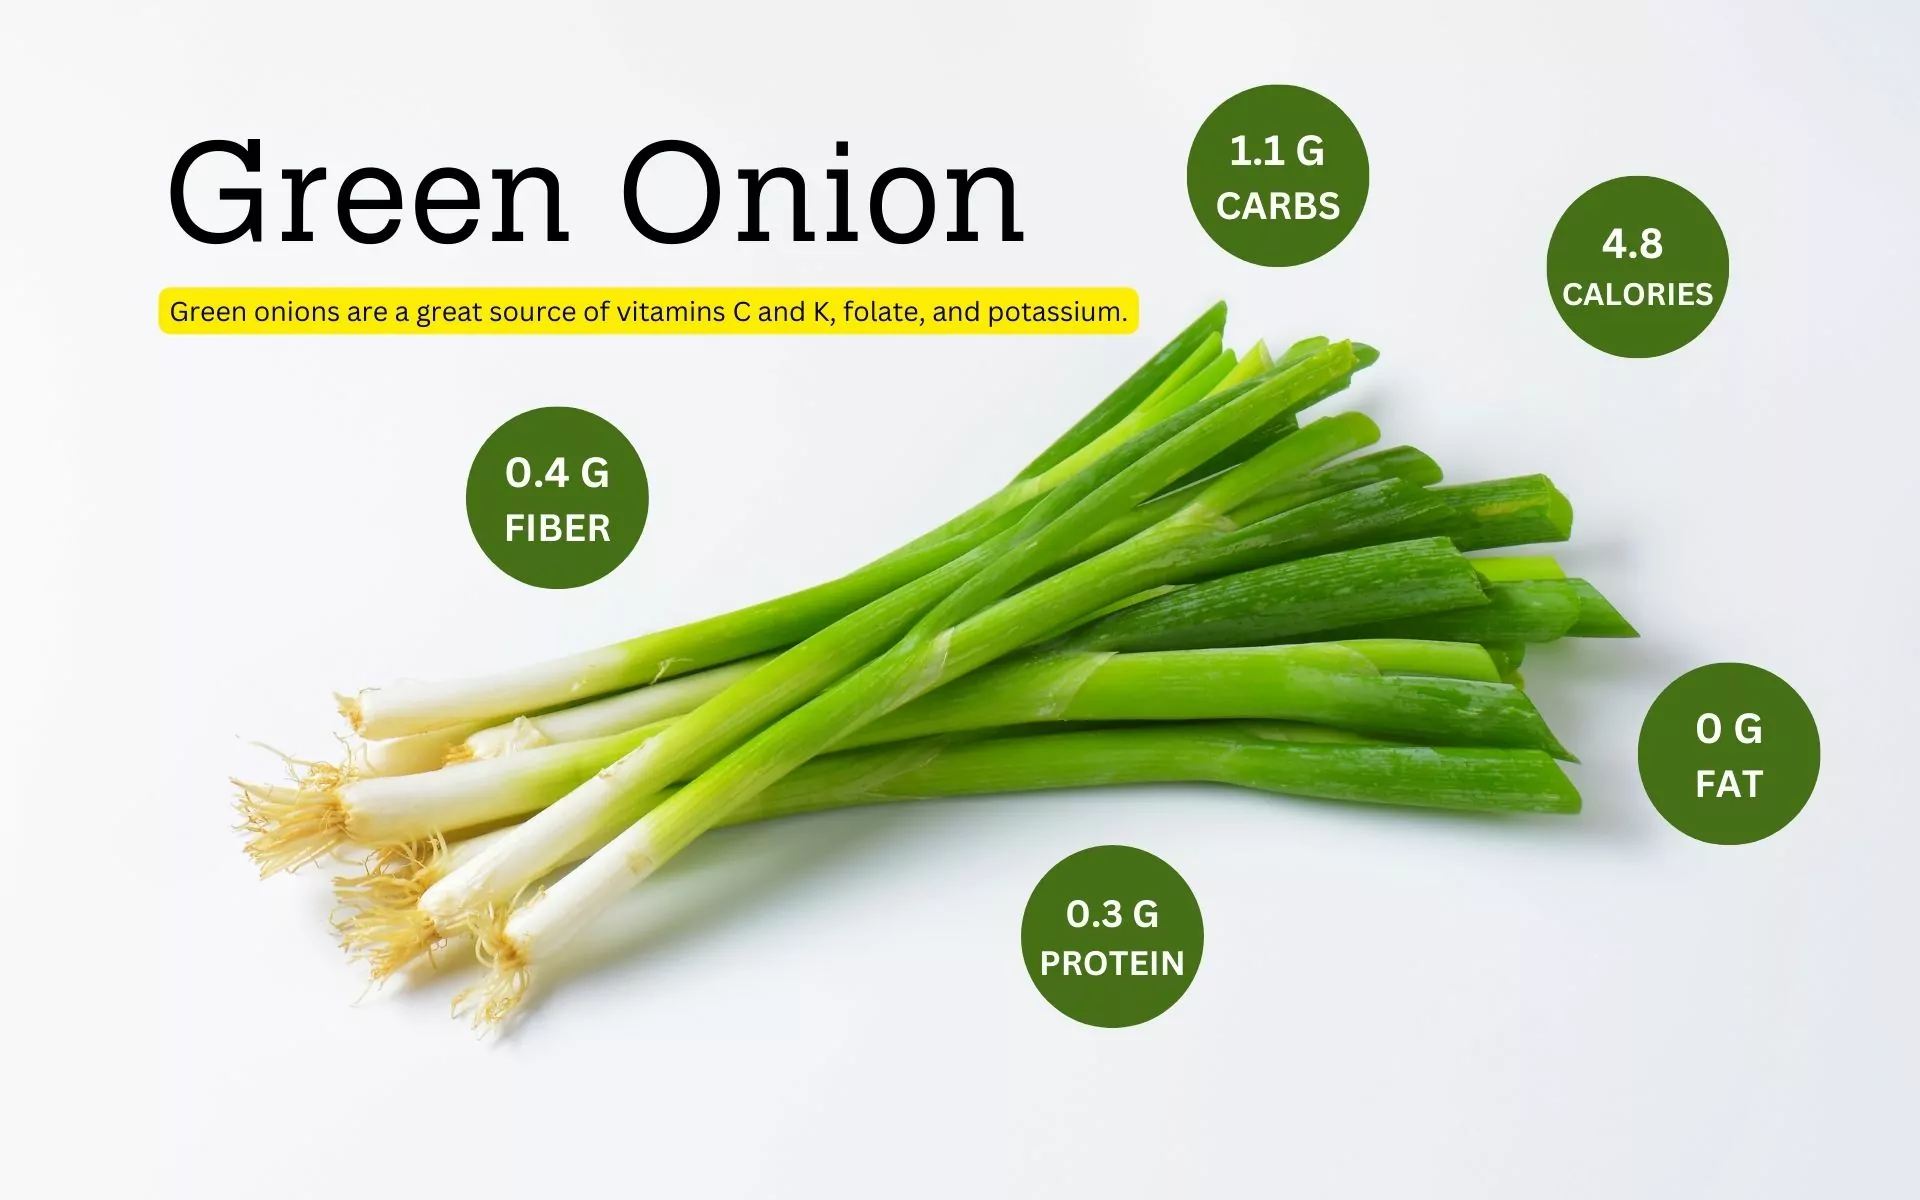 Go for Green Onions to Get These 9 Health Benefits